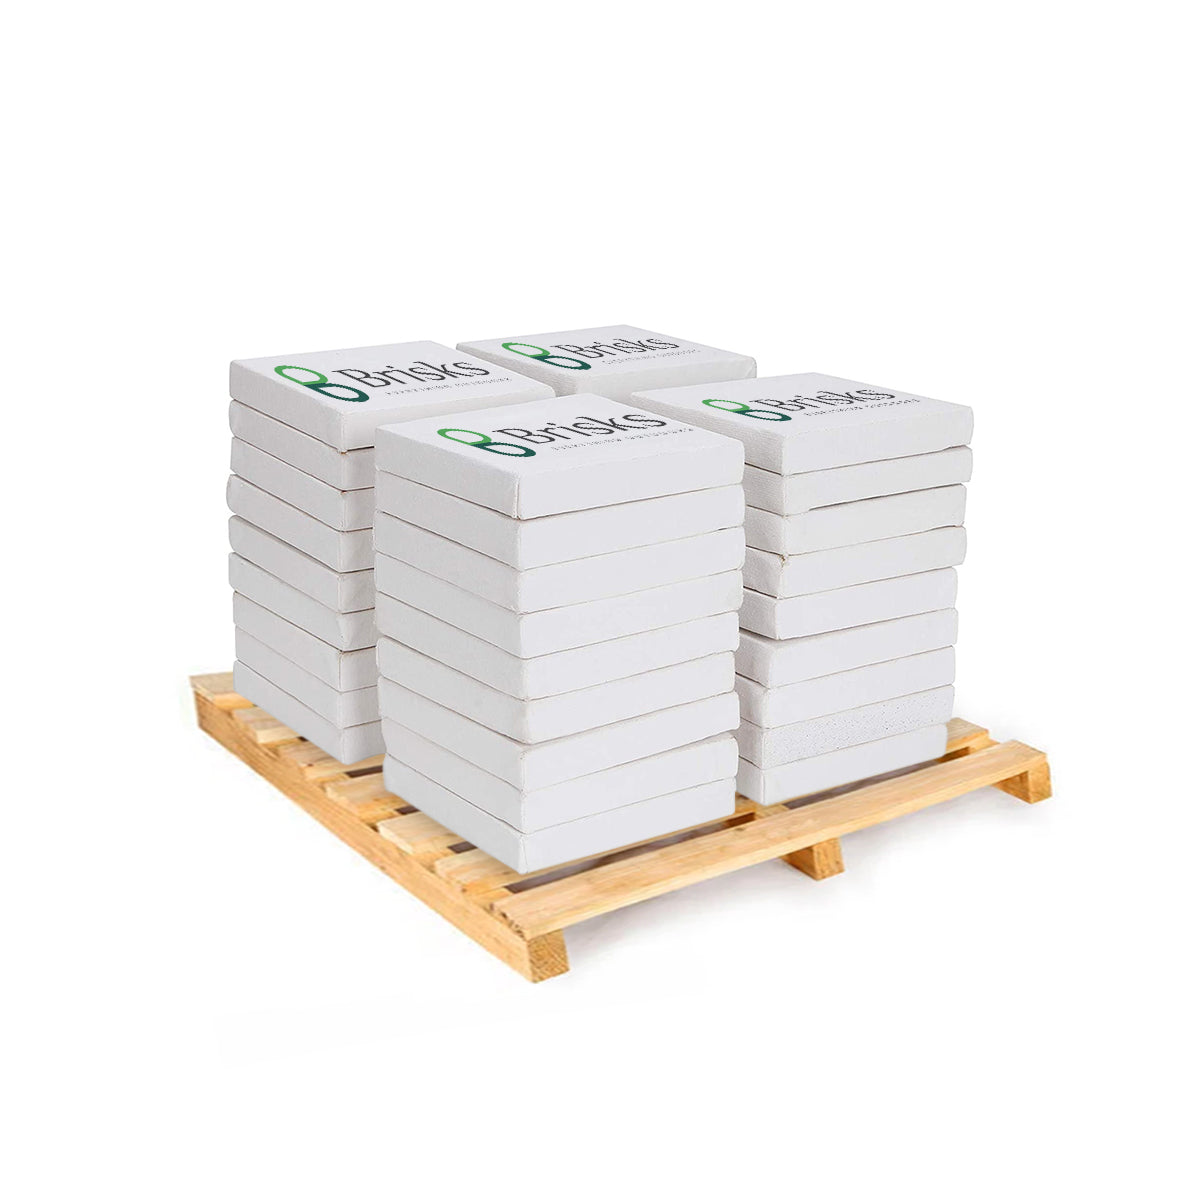 A stack of white High Performance Concrete bricks, each labeled with the Brisks logo, neatly arranged on a wooden pallet. The stack consists of multiple columns of high-performance concrete bricks, showcasing a clean and organized layout.